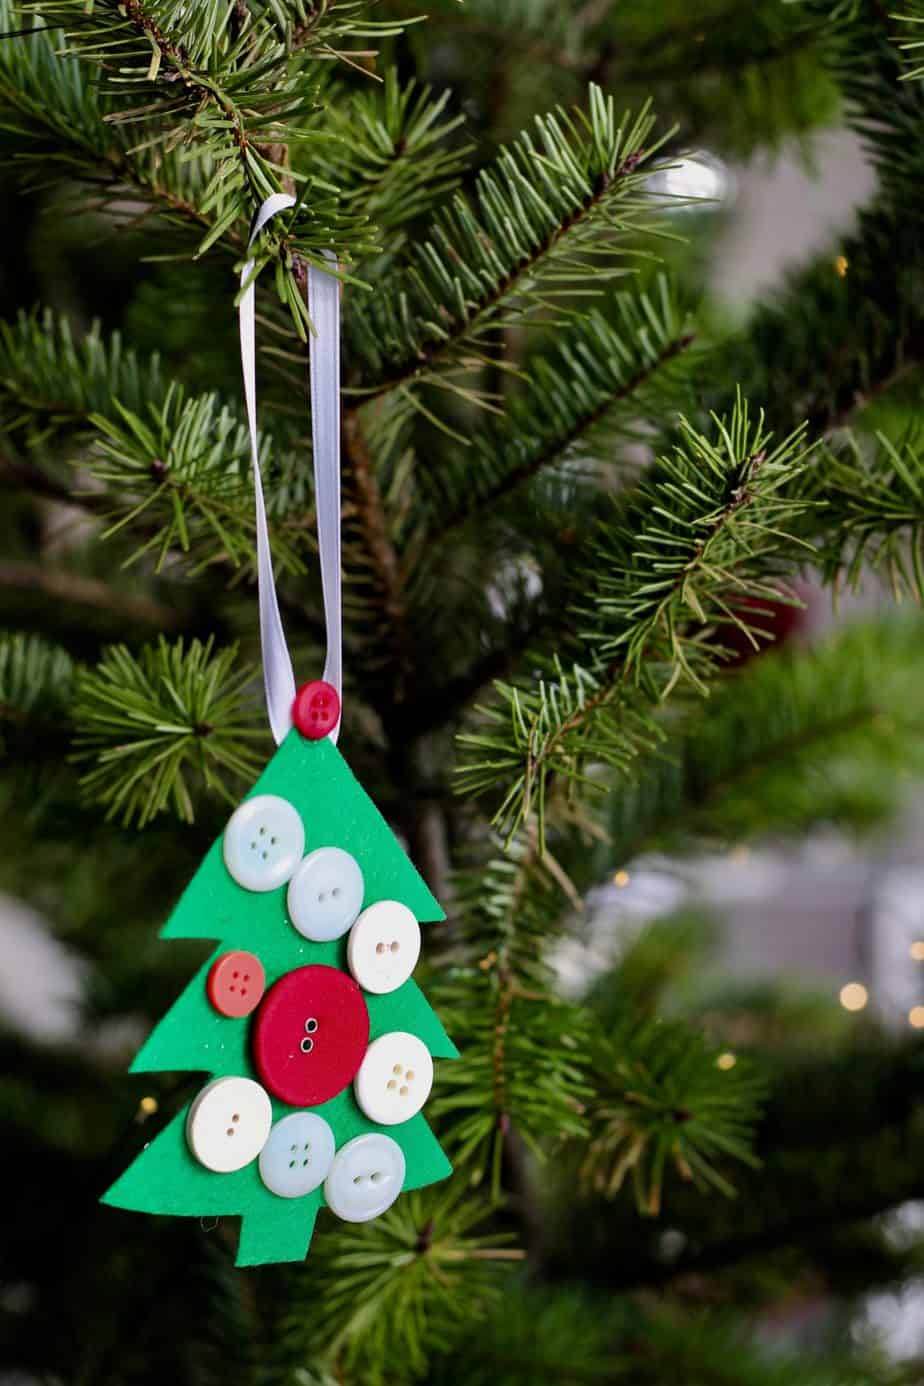 Button Christmas tree ornaments